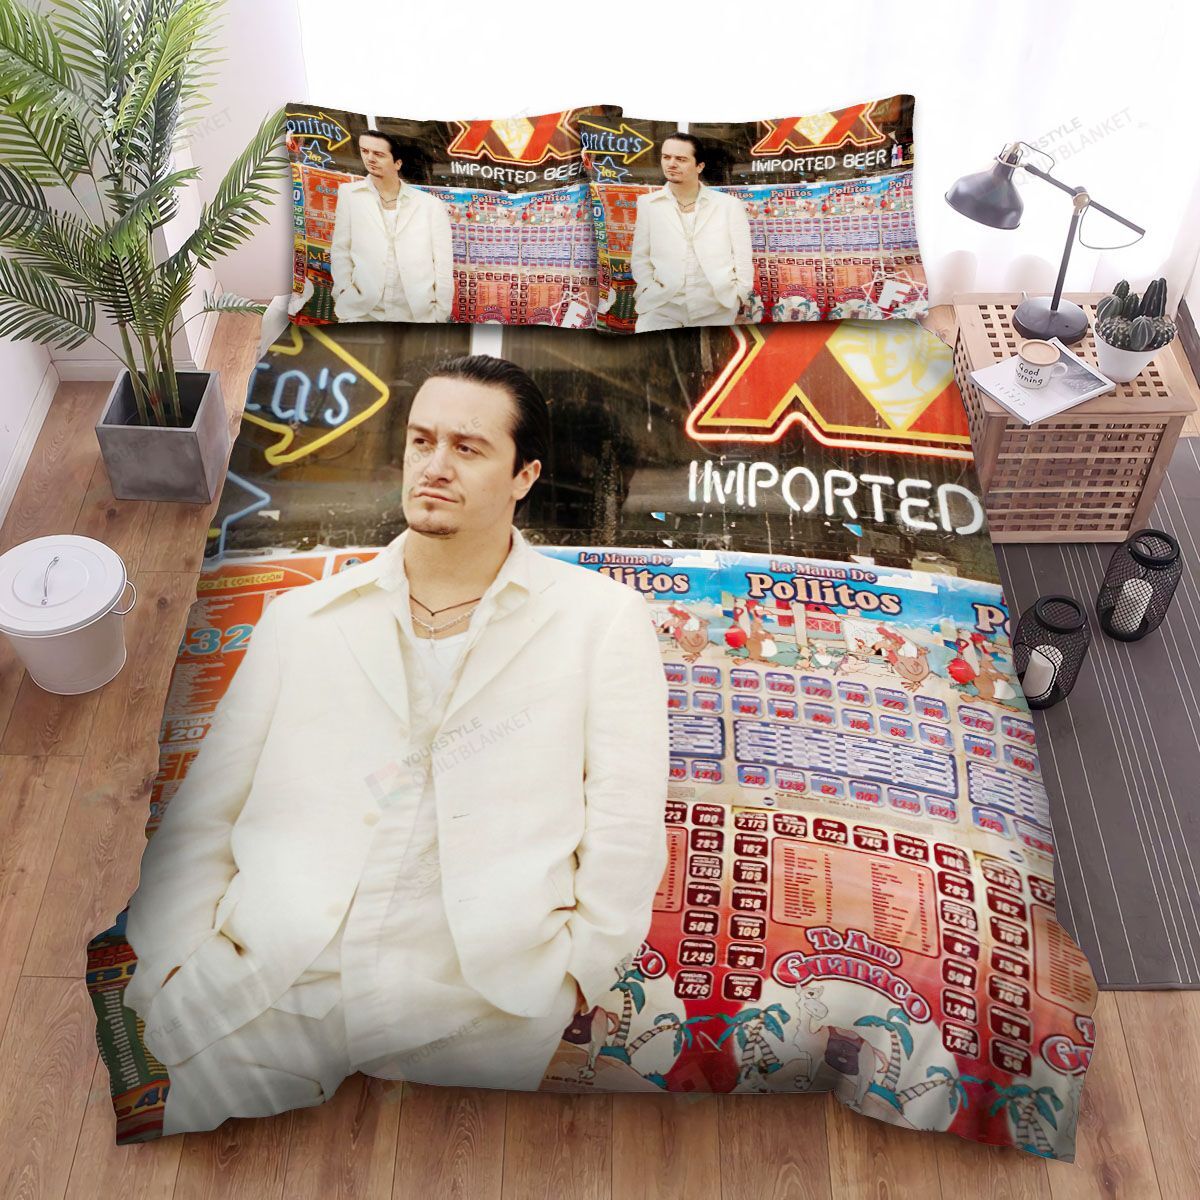 Mike Patton Imported Beer Bed Sheets Spread Comforter Duvet Cover Bedding Sets